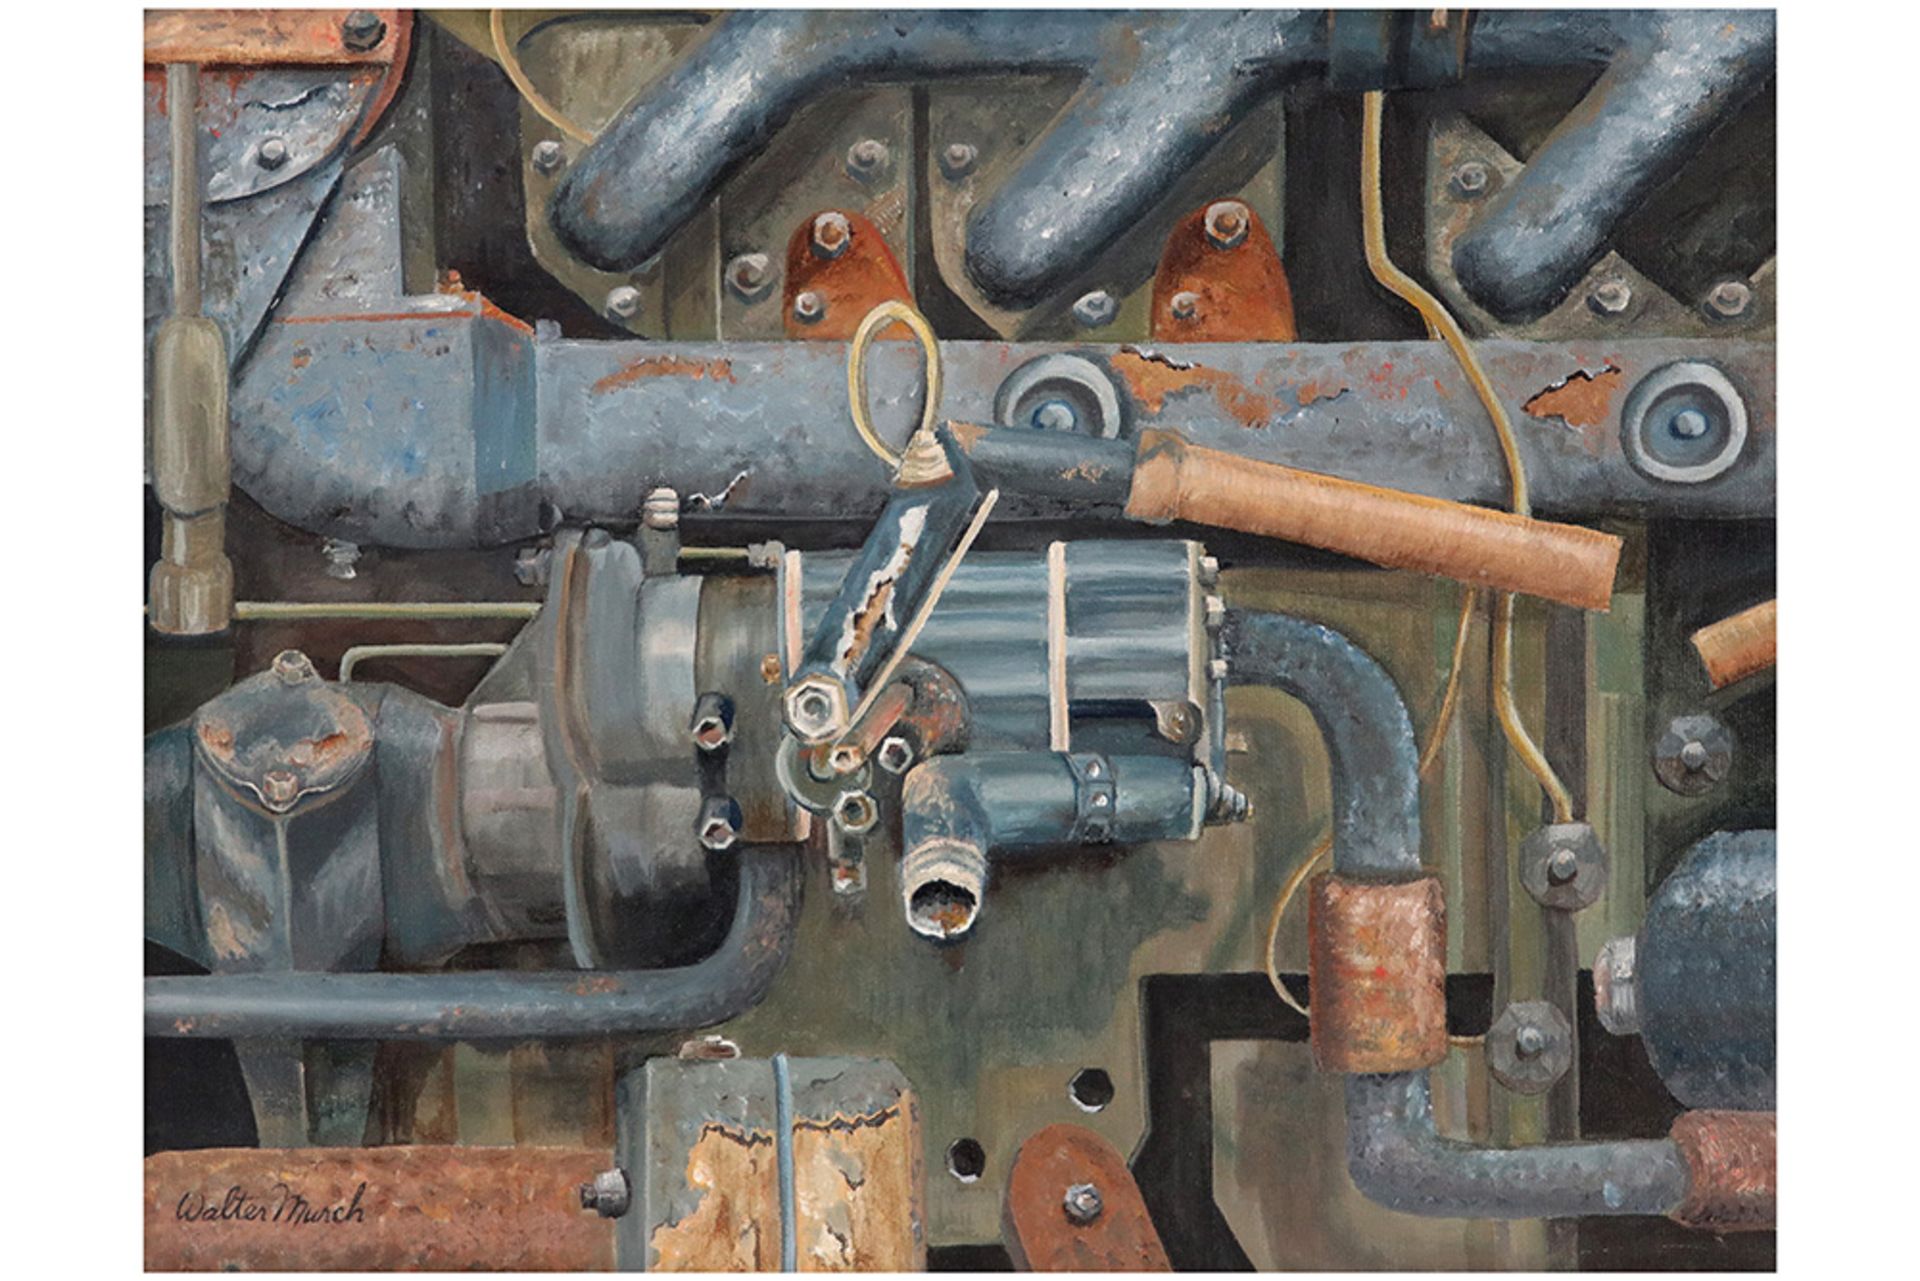 Walter Tandy Murch "Machine" oil on panel - signed || MURCH WALTER TANDY (1907-1967)